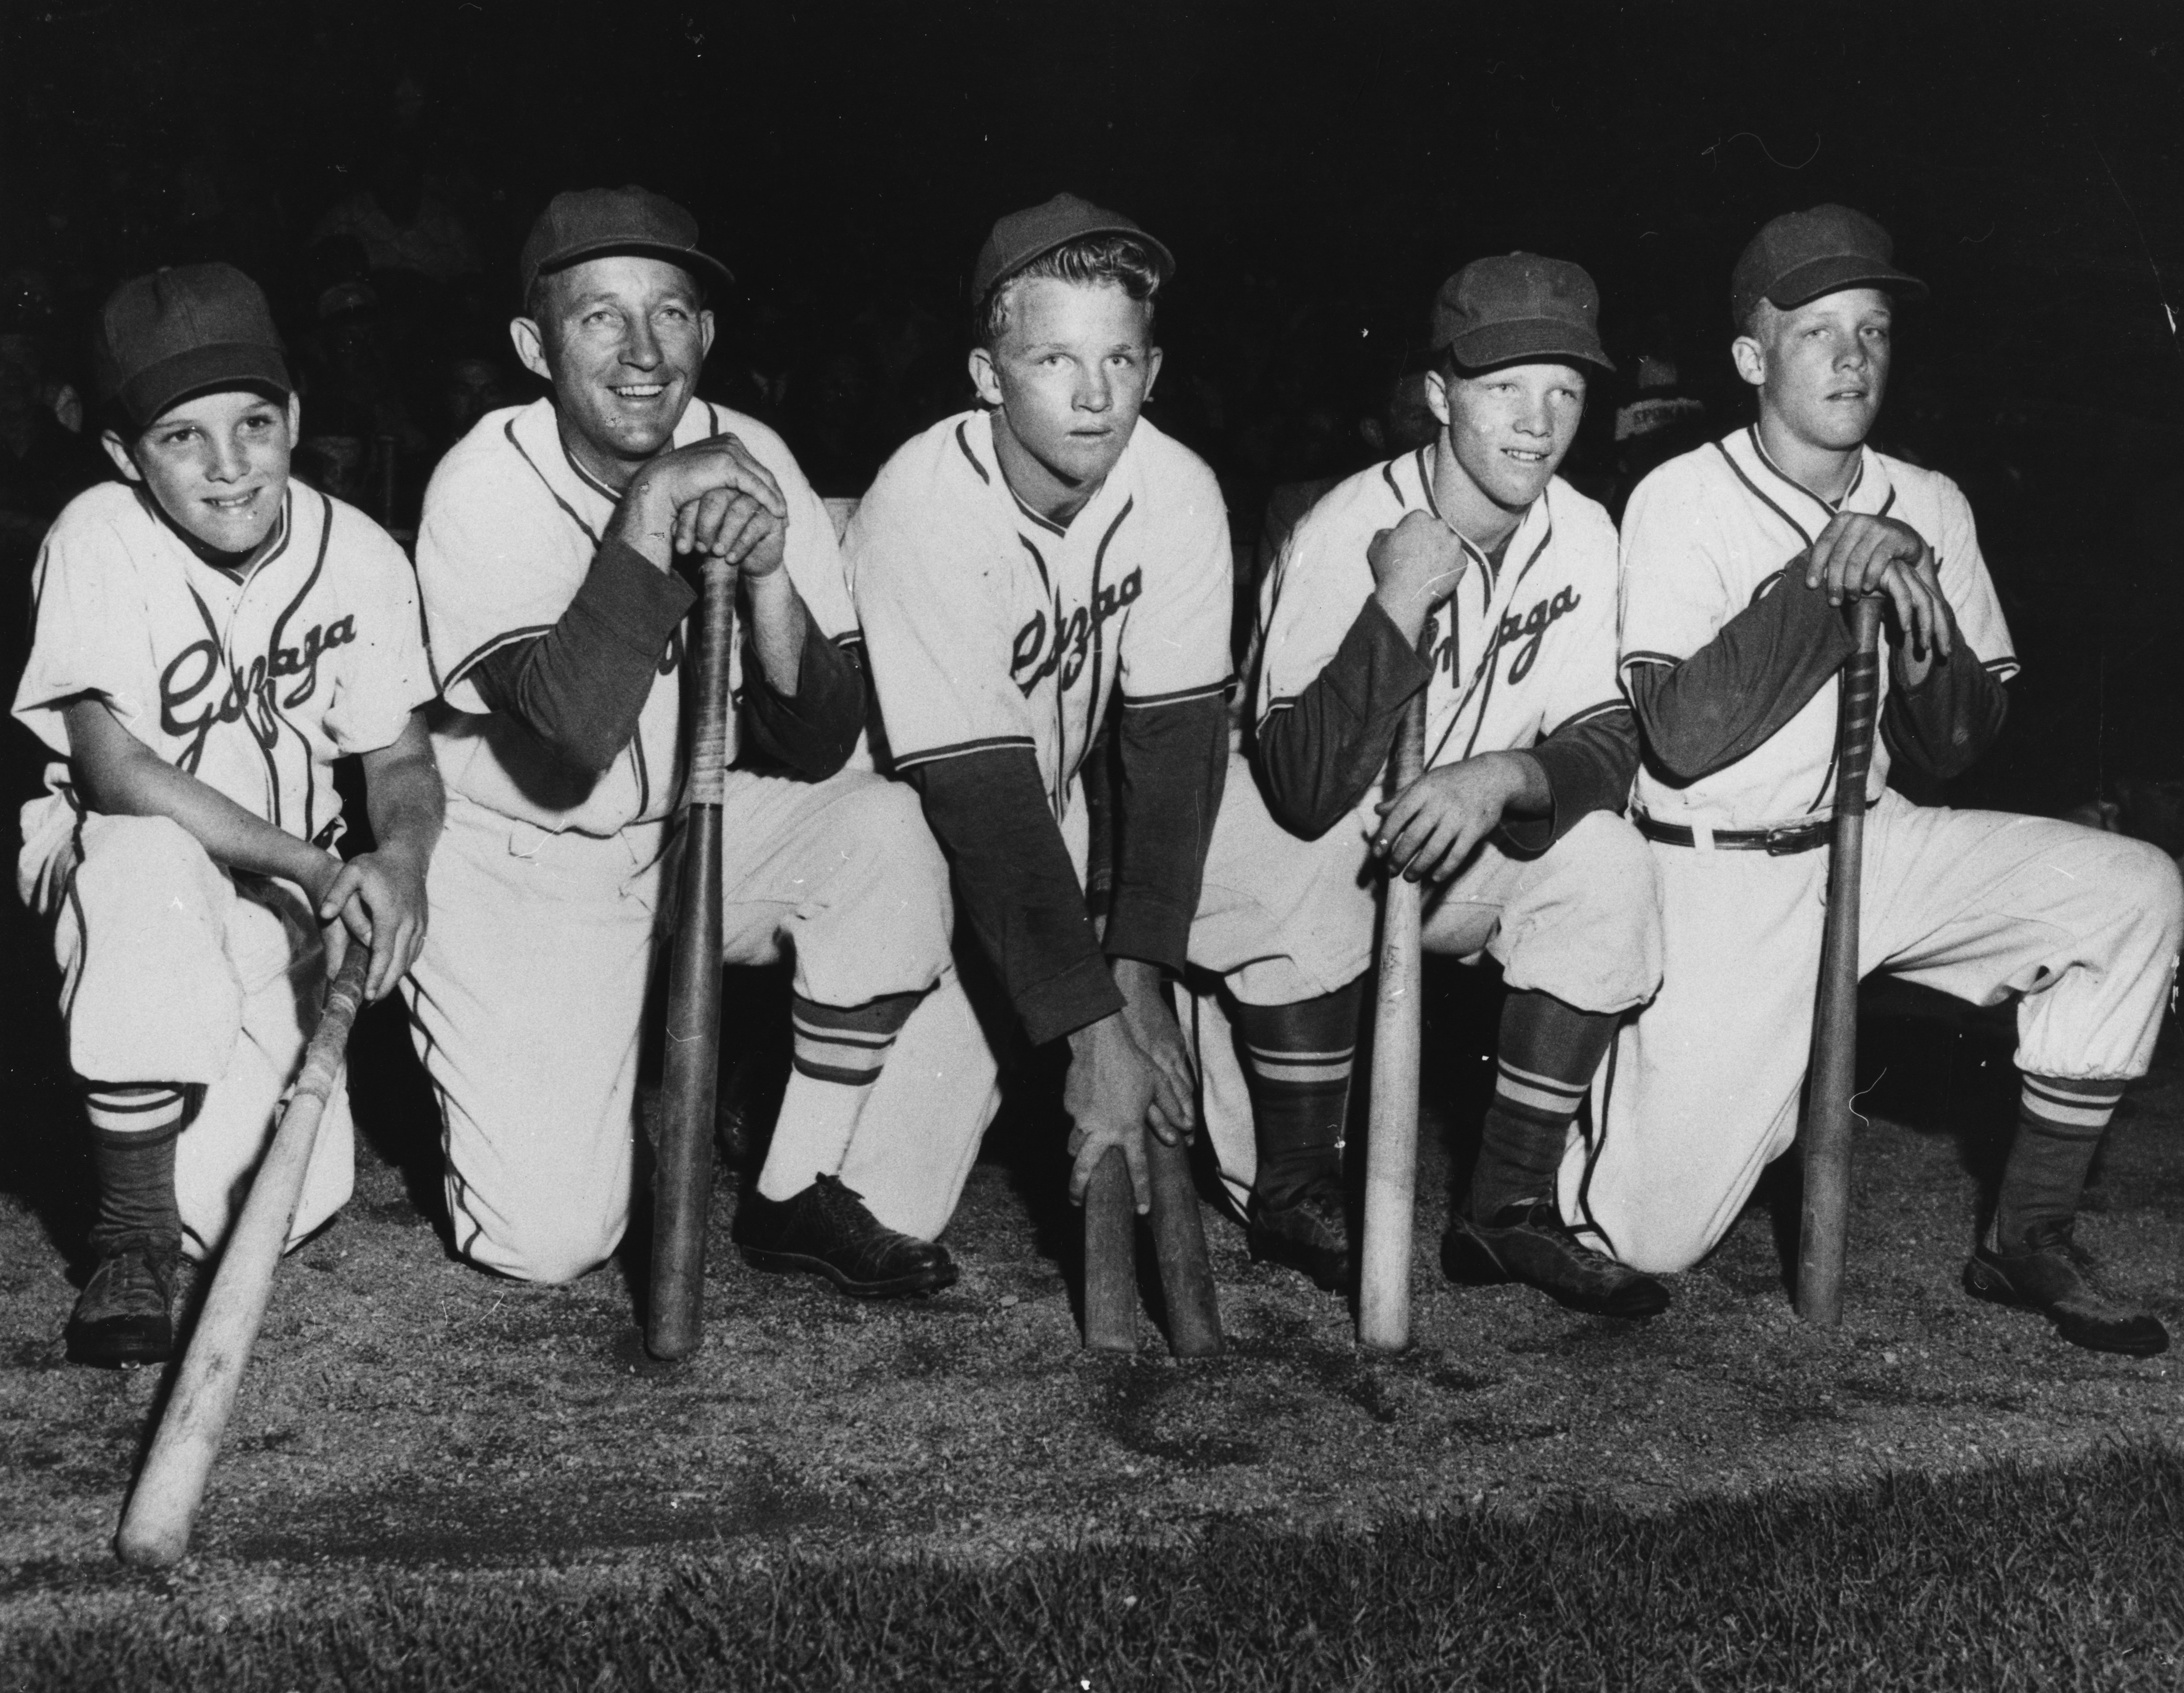 Singer and actor Bing Crosby (second left) and his sons (L-R) Lindsay, Gary, Dennis and Phillip, all wearing baseball uniforms and kneeling with baseball bats, circa 1950. | Source: Getty Images